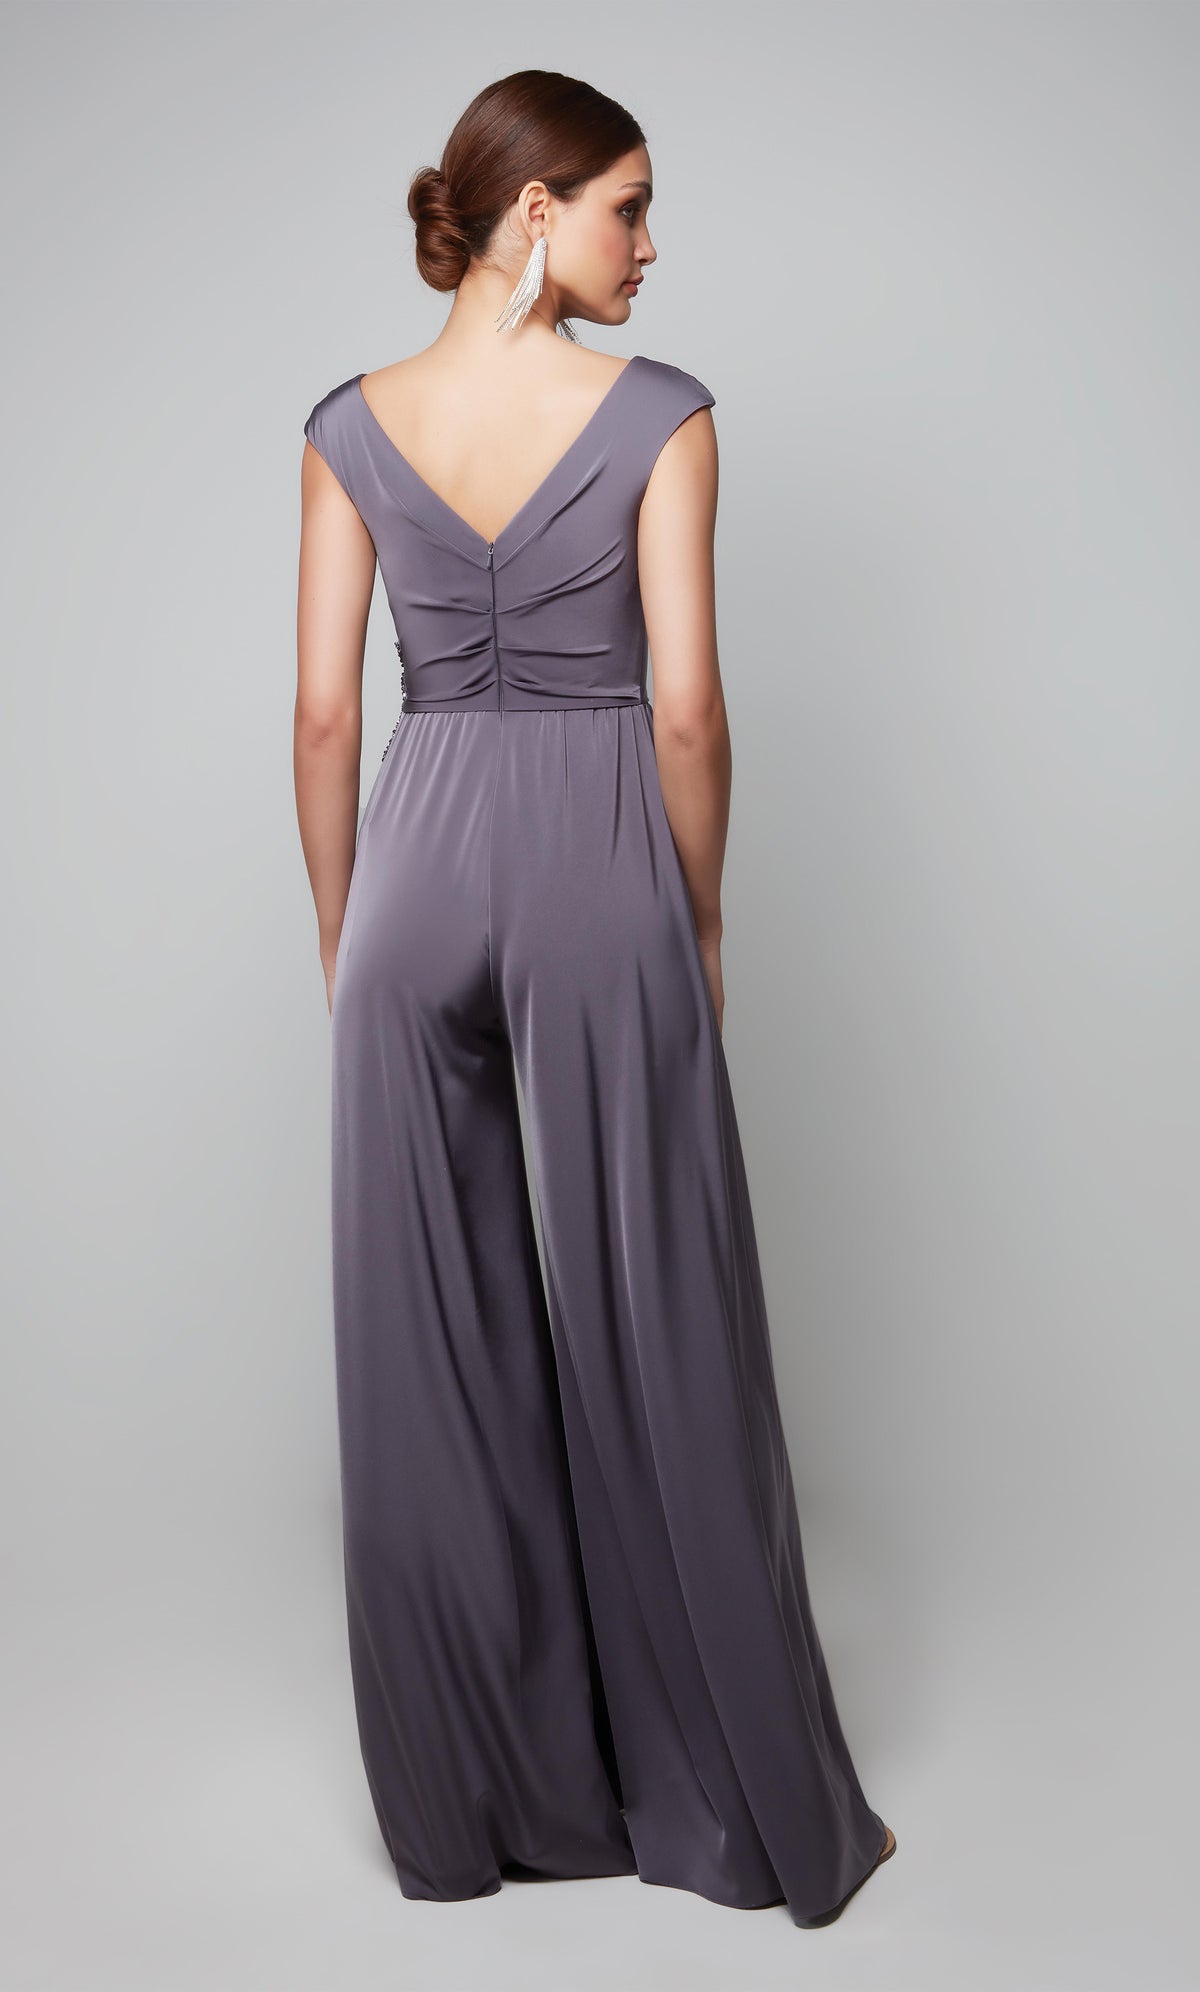 Elegant wide leg jumpsuit with cap sleeves and lace applique at the waist in graphite.